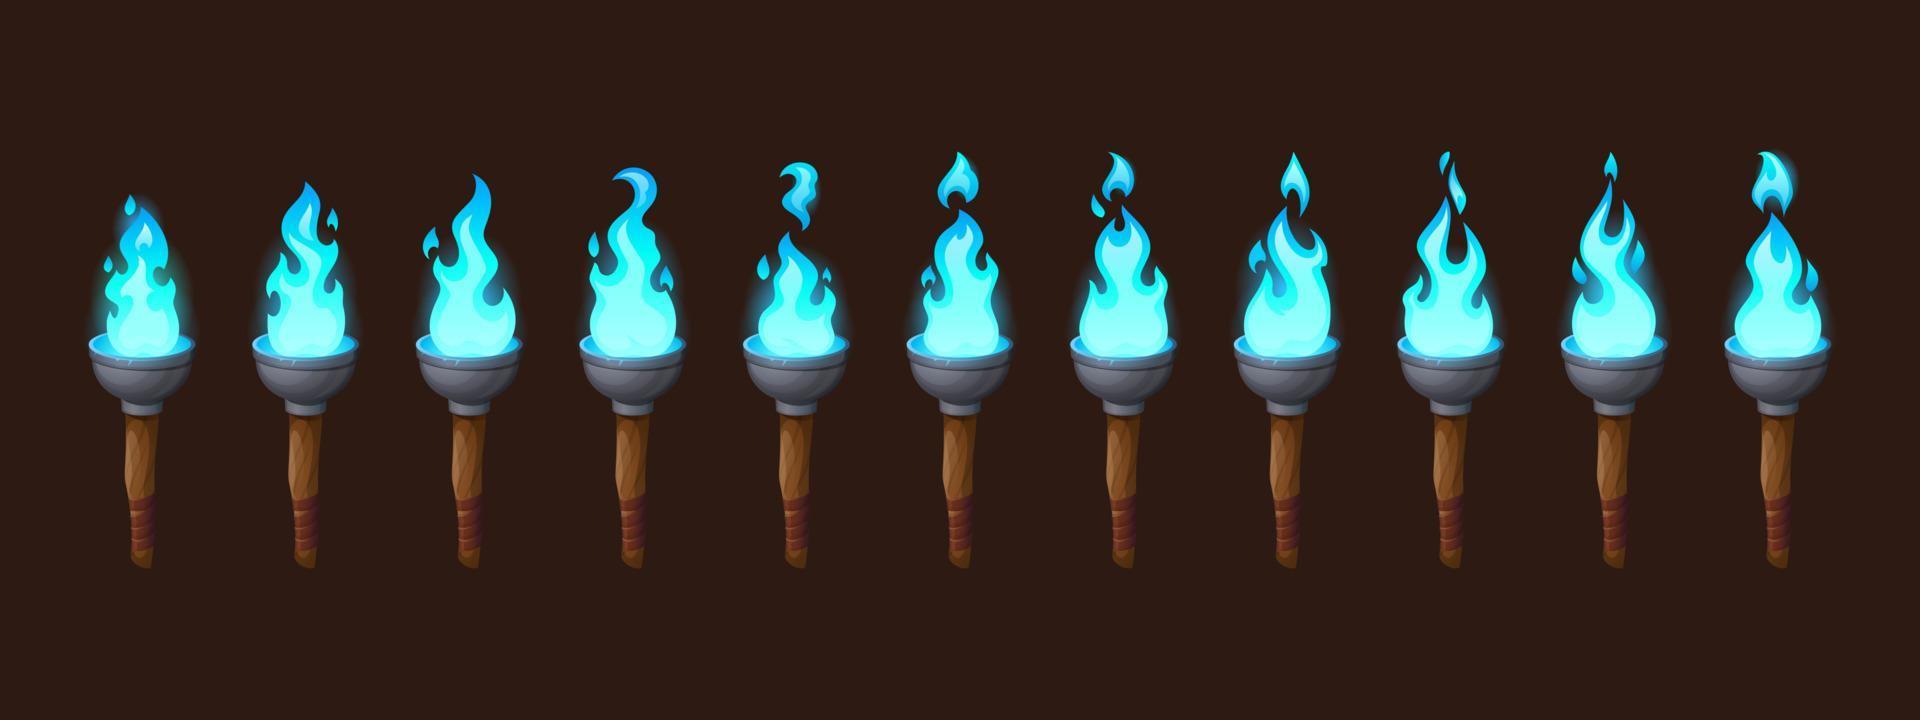 Burning fire on old torch animation sprite vector